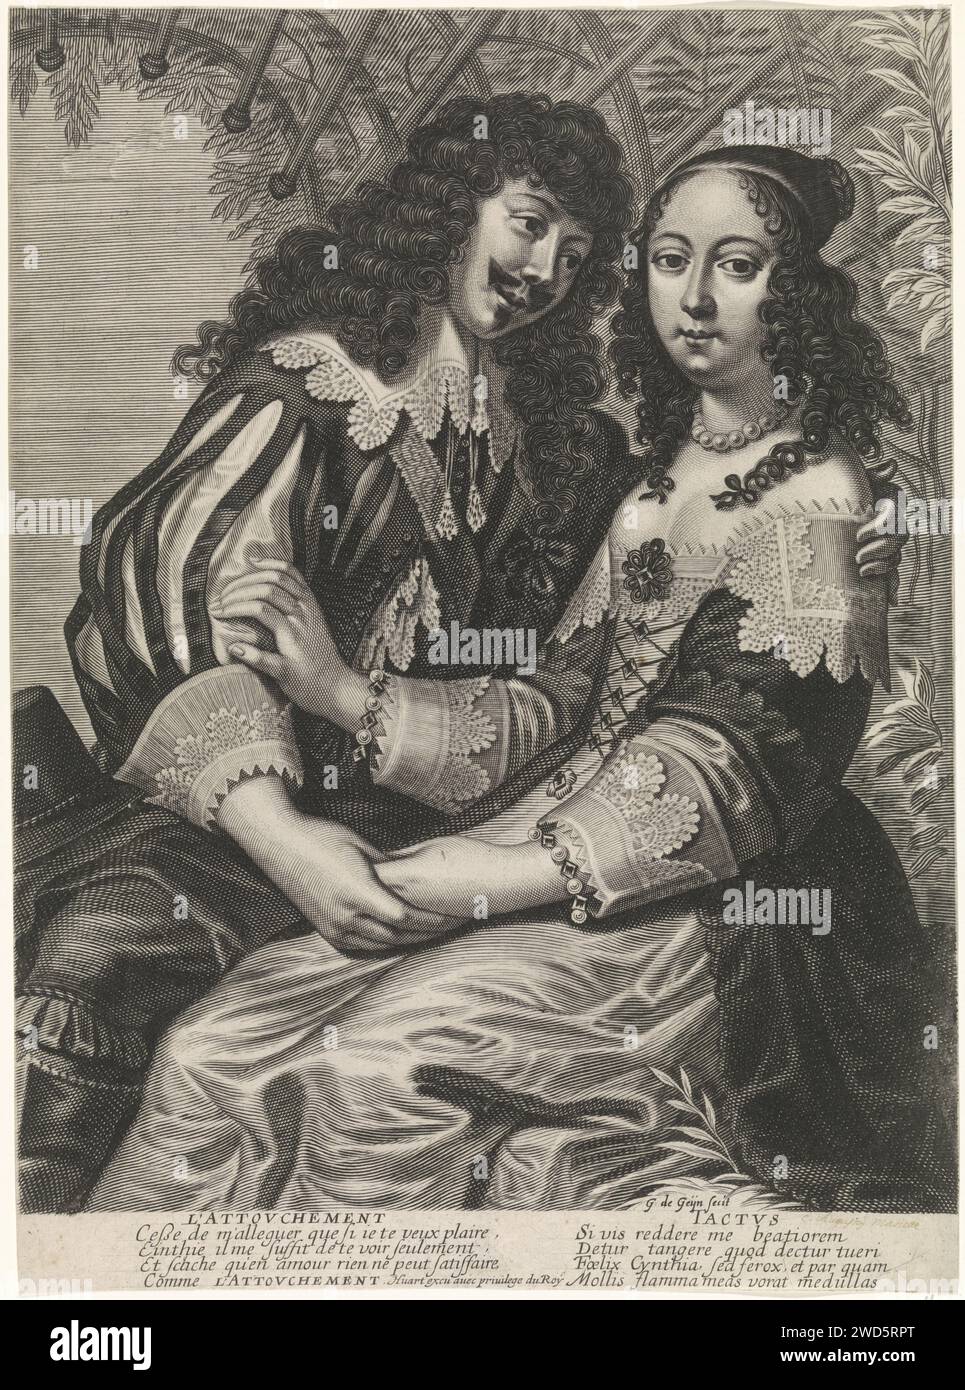 Feeling, Guilliam de Gheyn, 1620 - 1650 print A noble couple under a rose arch. The man holds the woman's hand and leans forward. The woman holds the man's upper arm. Paris paper engraving feeling (one of the five senses) (+ two persons). couple of lovers. garden ornaments Stock Photo